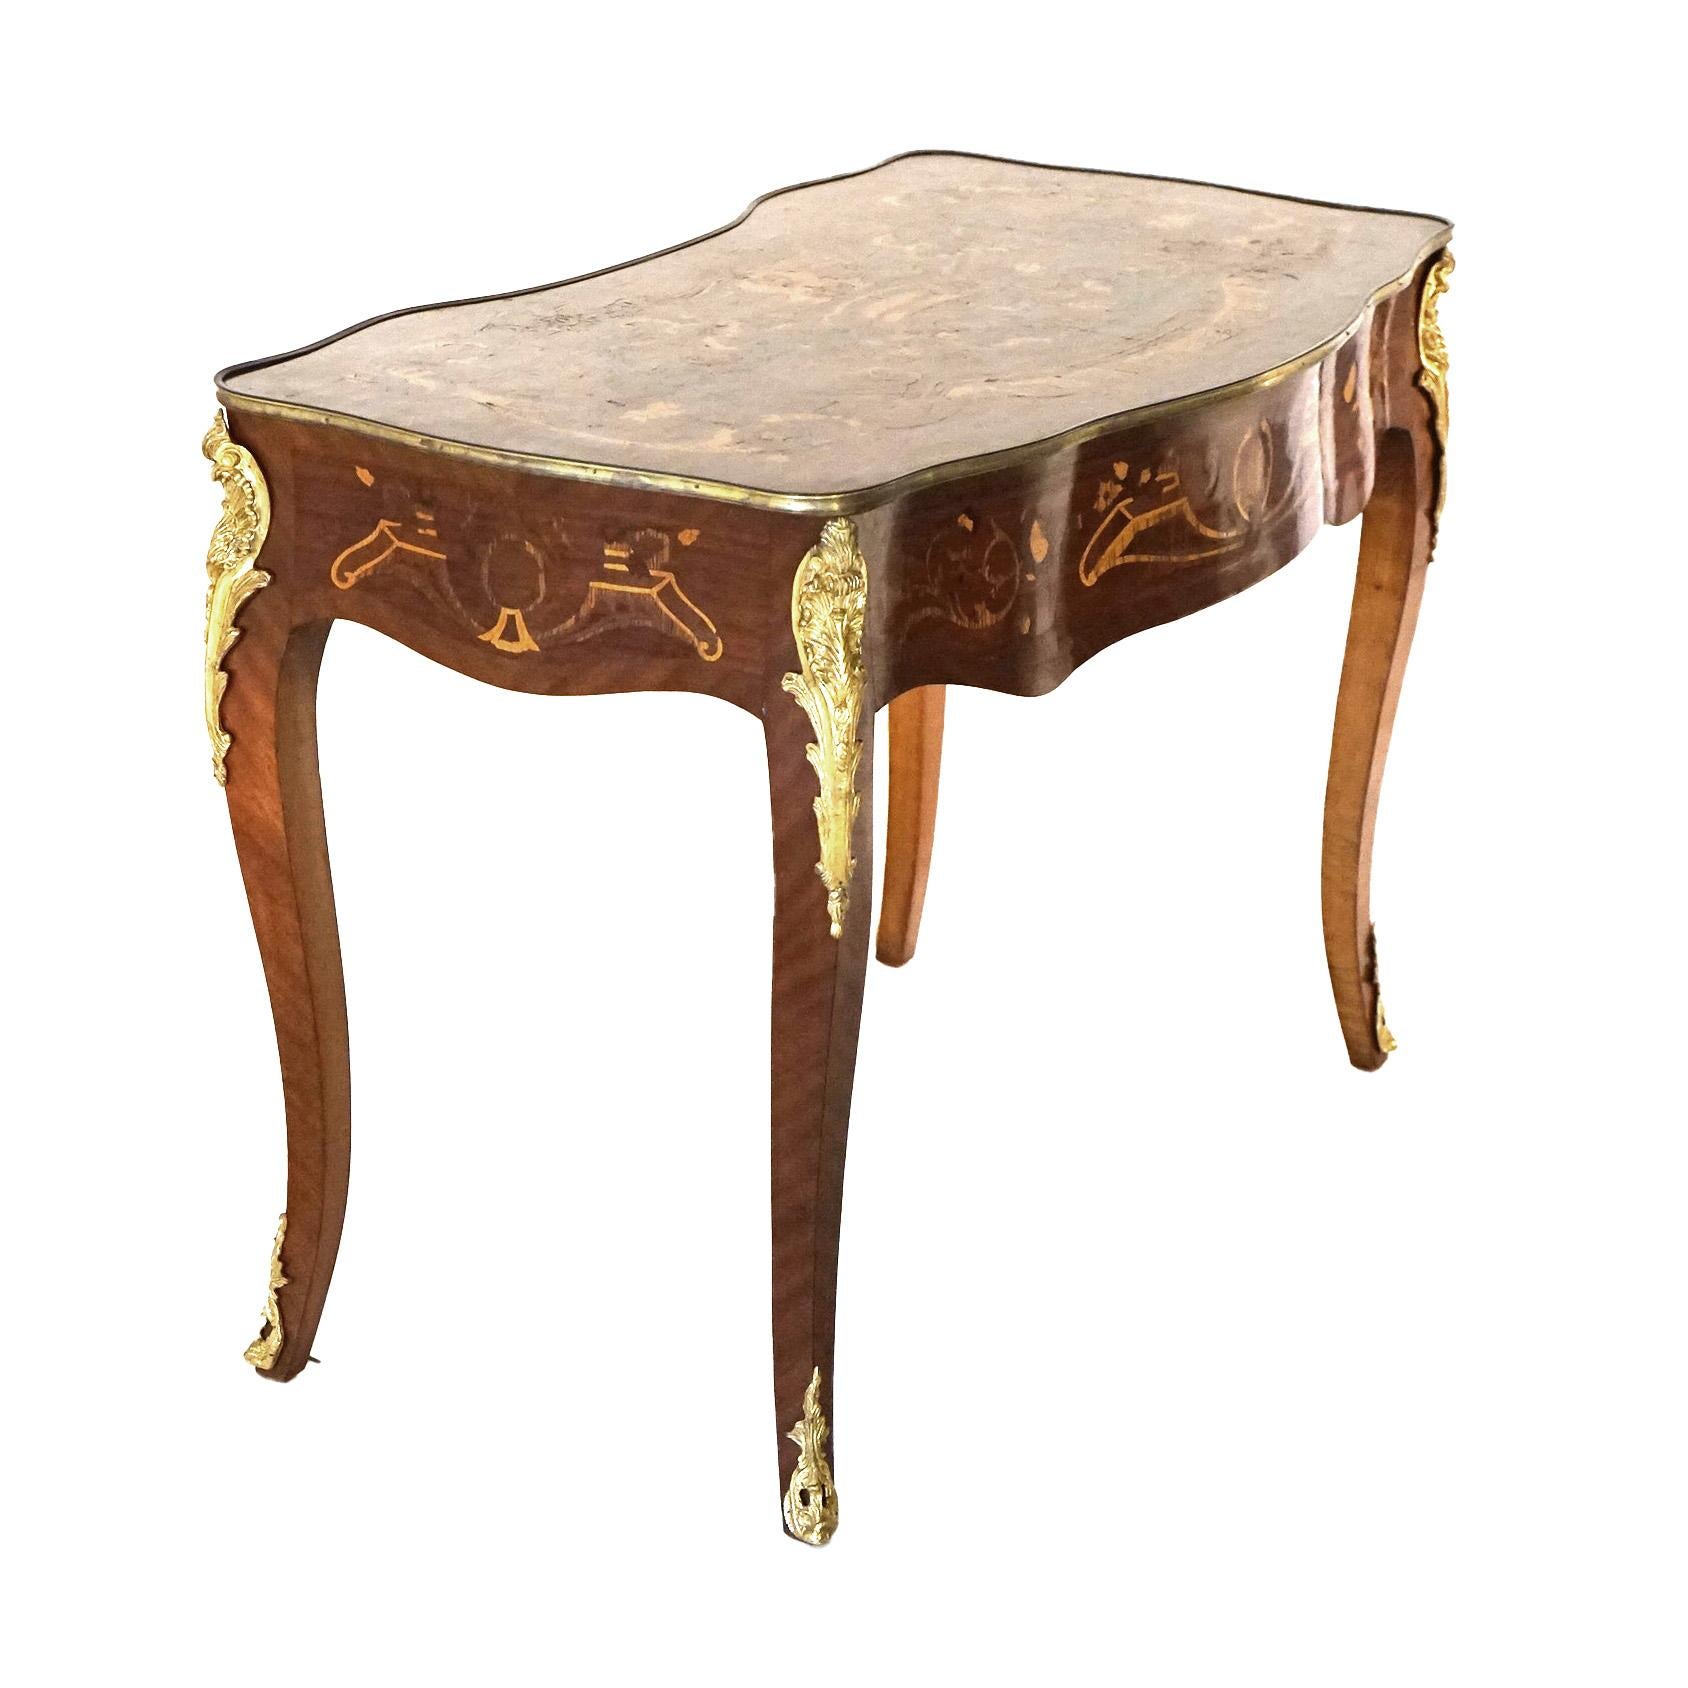 French Louis XIV Kingwood, Mahogany, Ormolu & Satinwood Bureau Plat Desk 20th C In Good Condition For Sale In Big Flats, NY